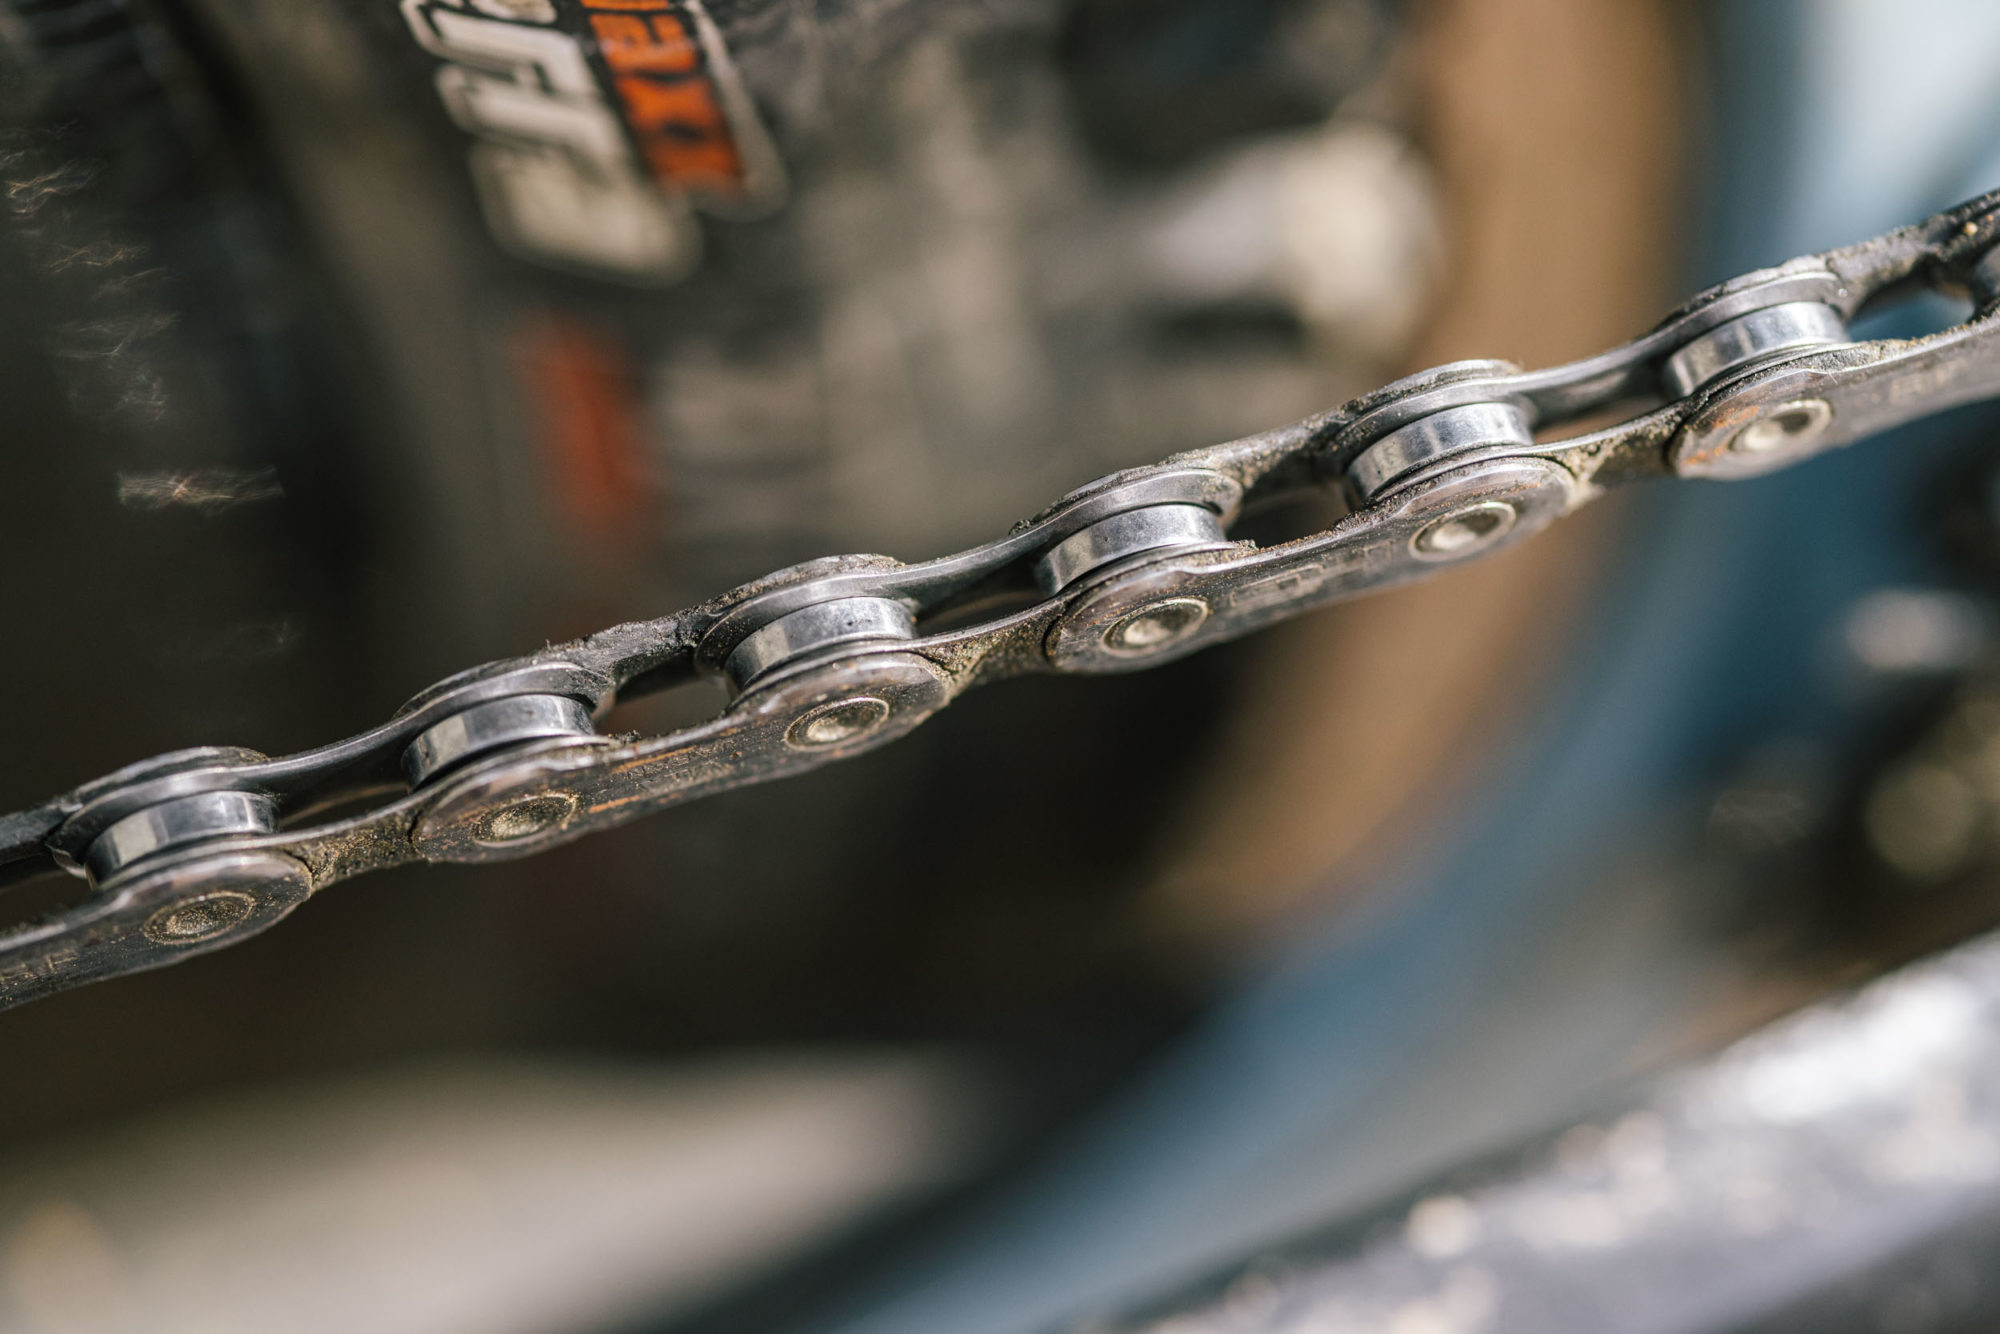 12-speed Shimano XT Review